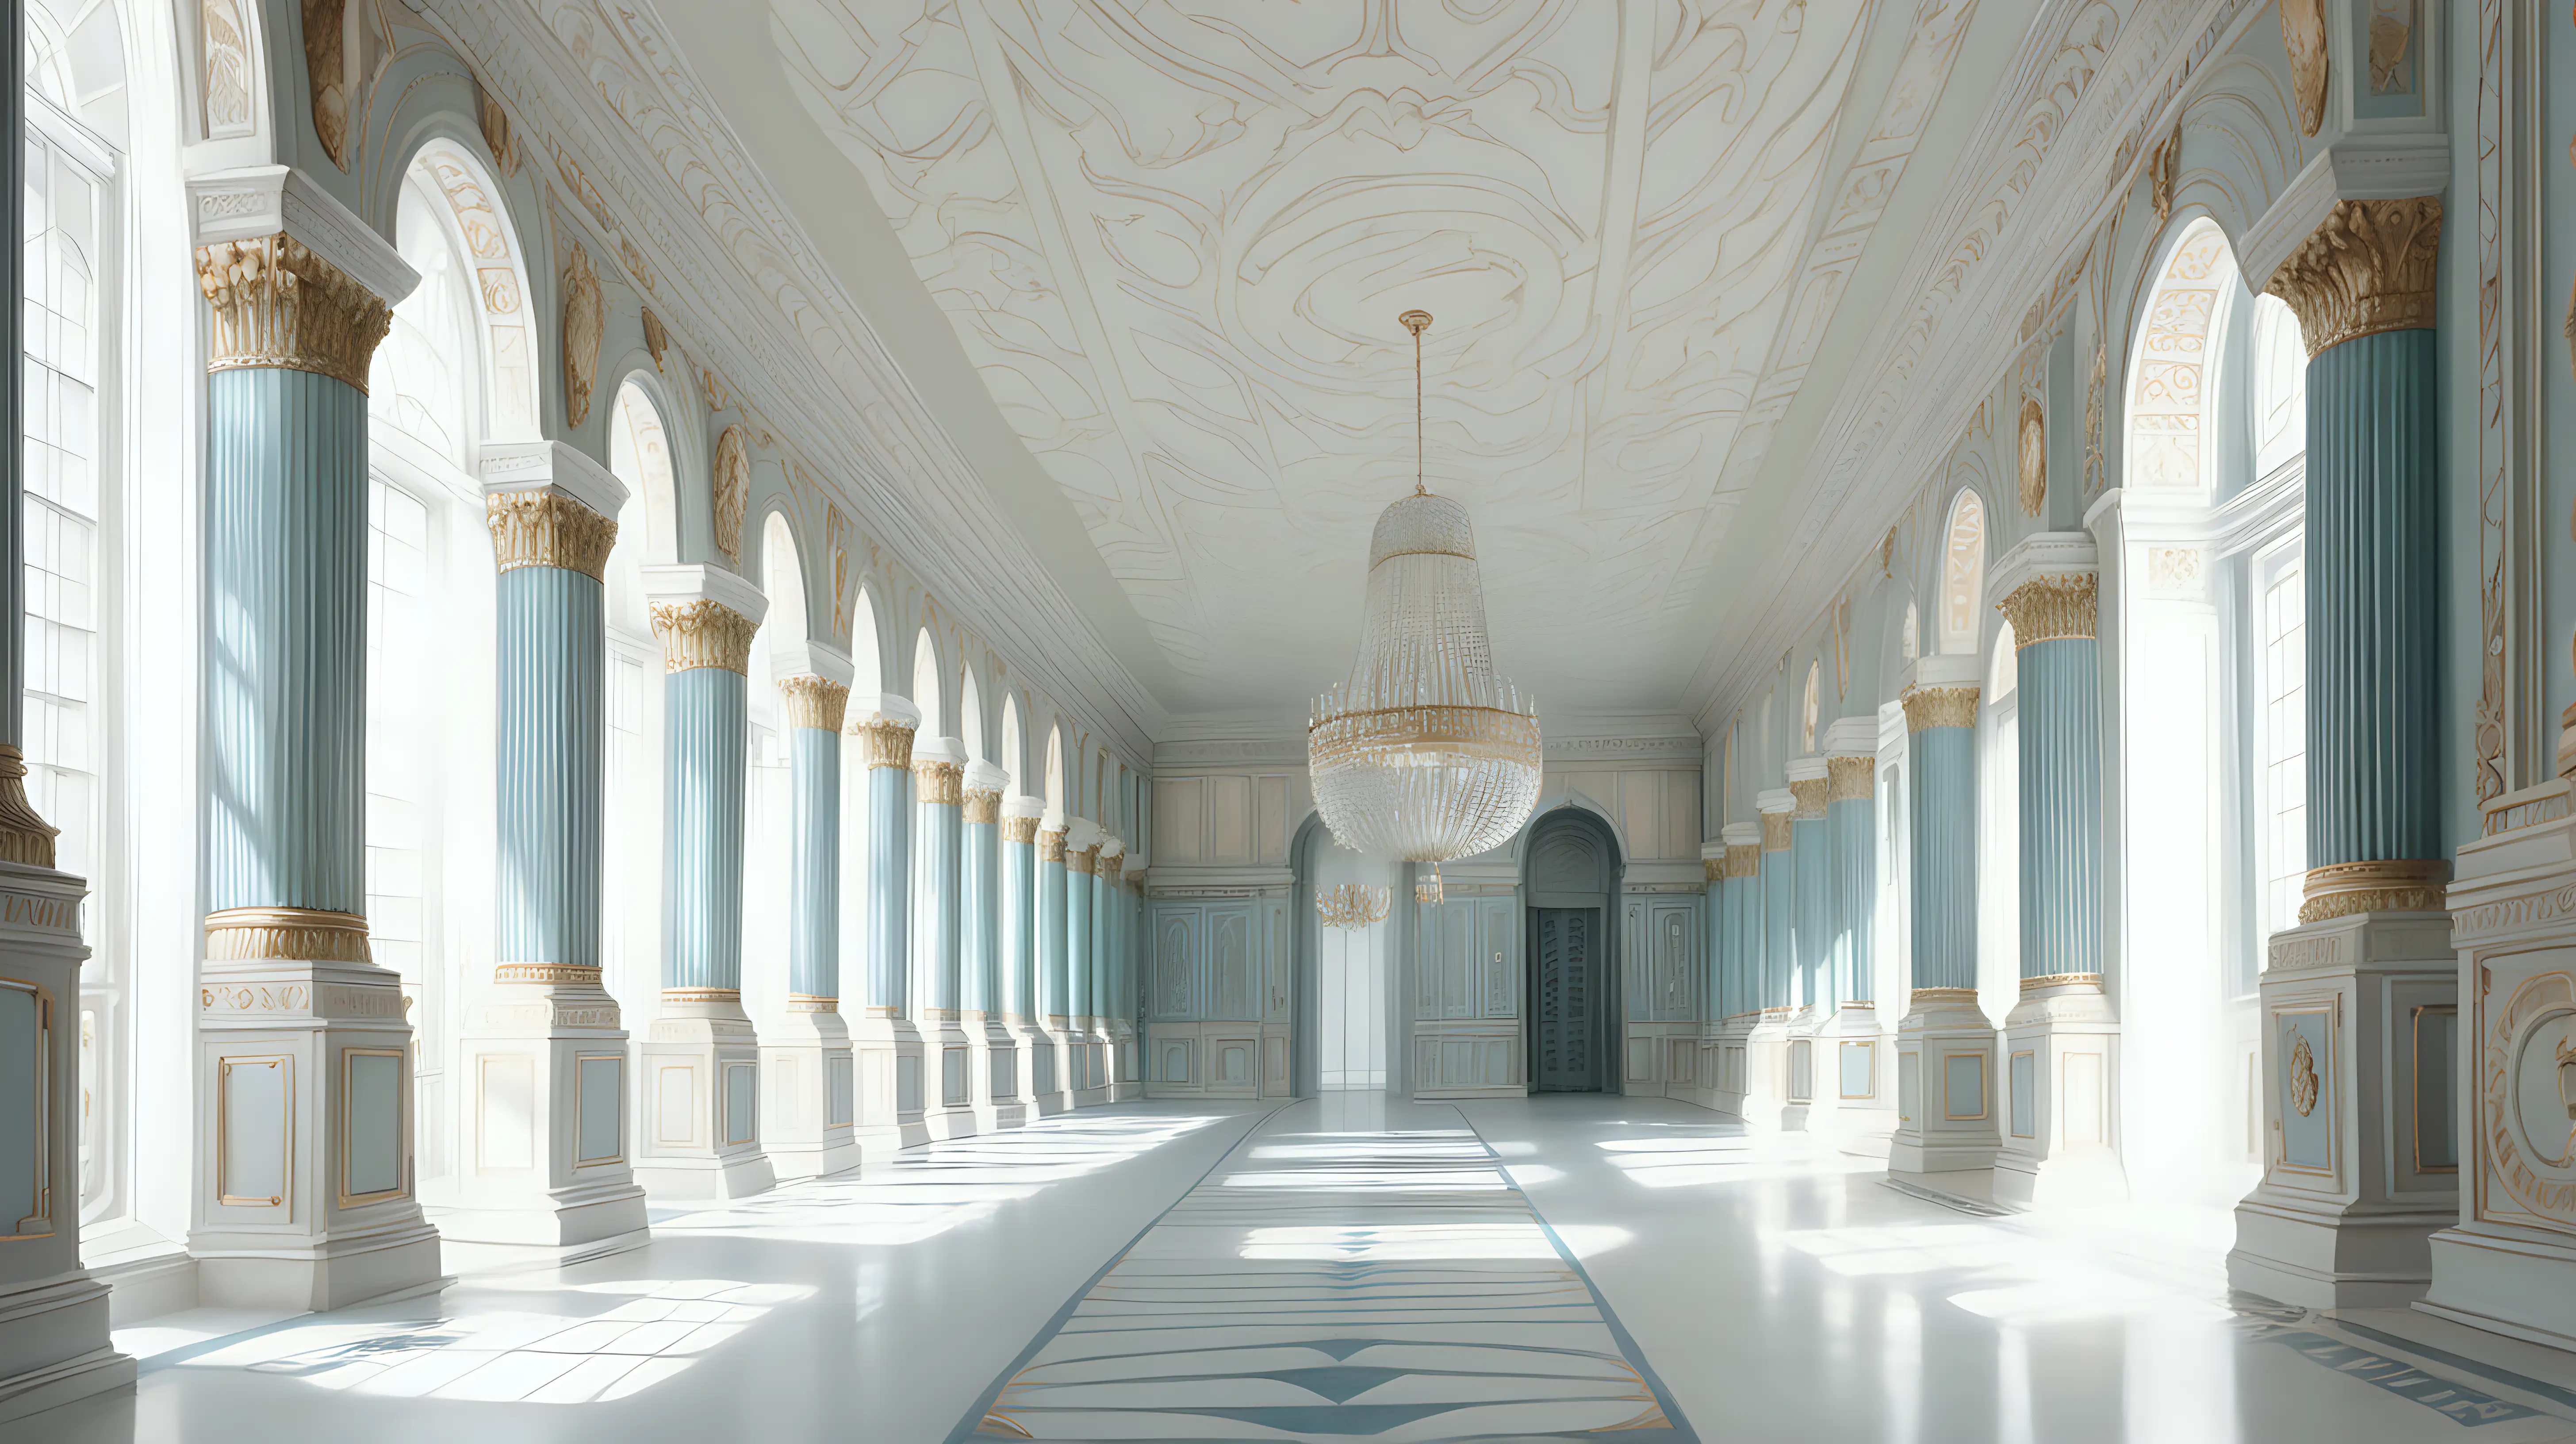 Elegant White Palace Hallway Painting with Intricate Details